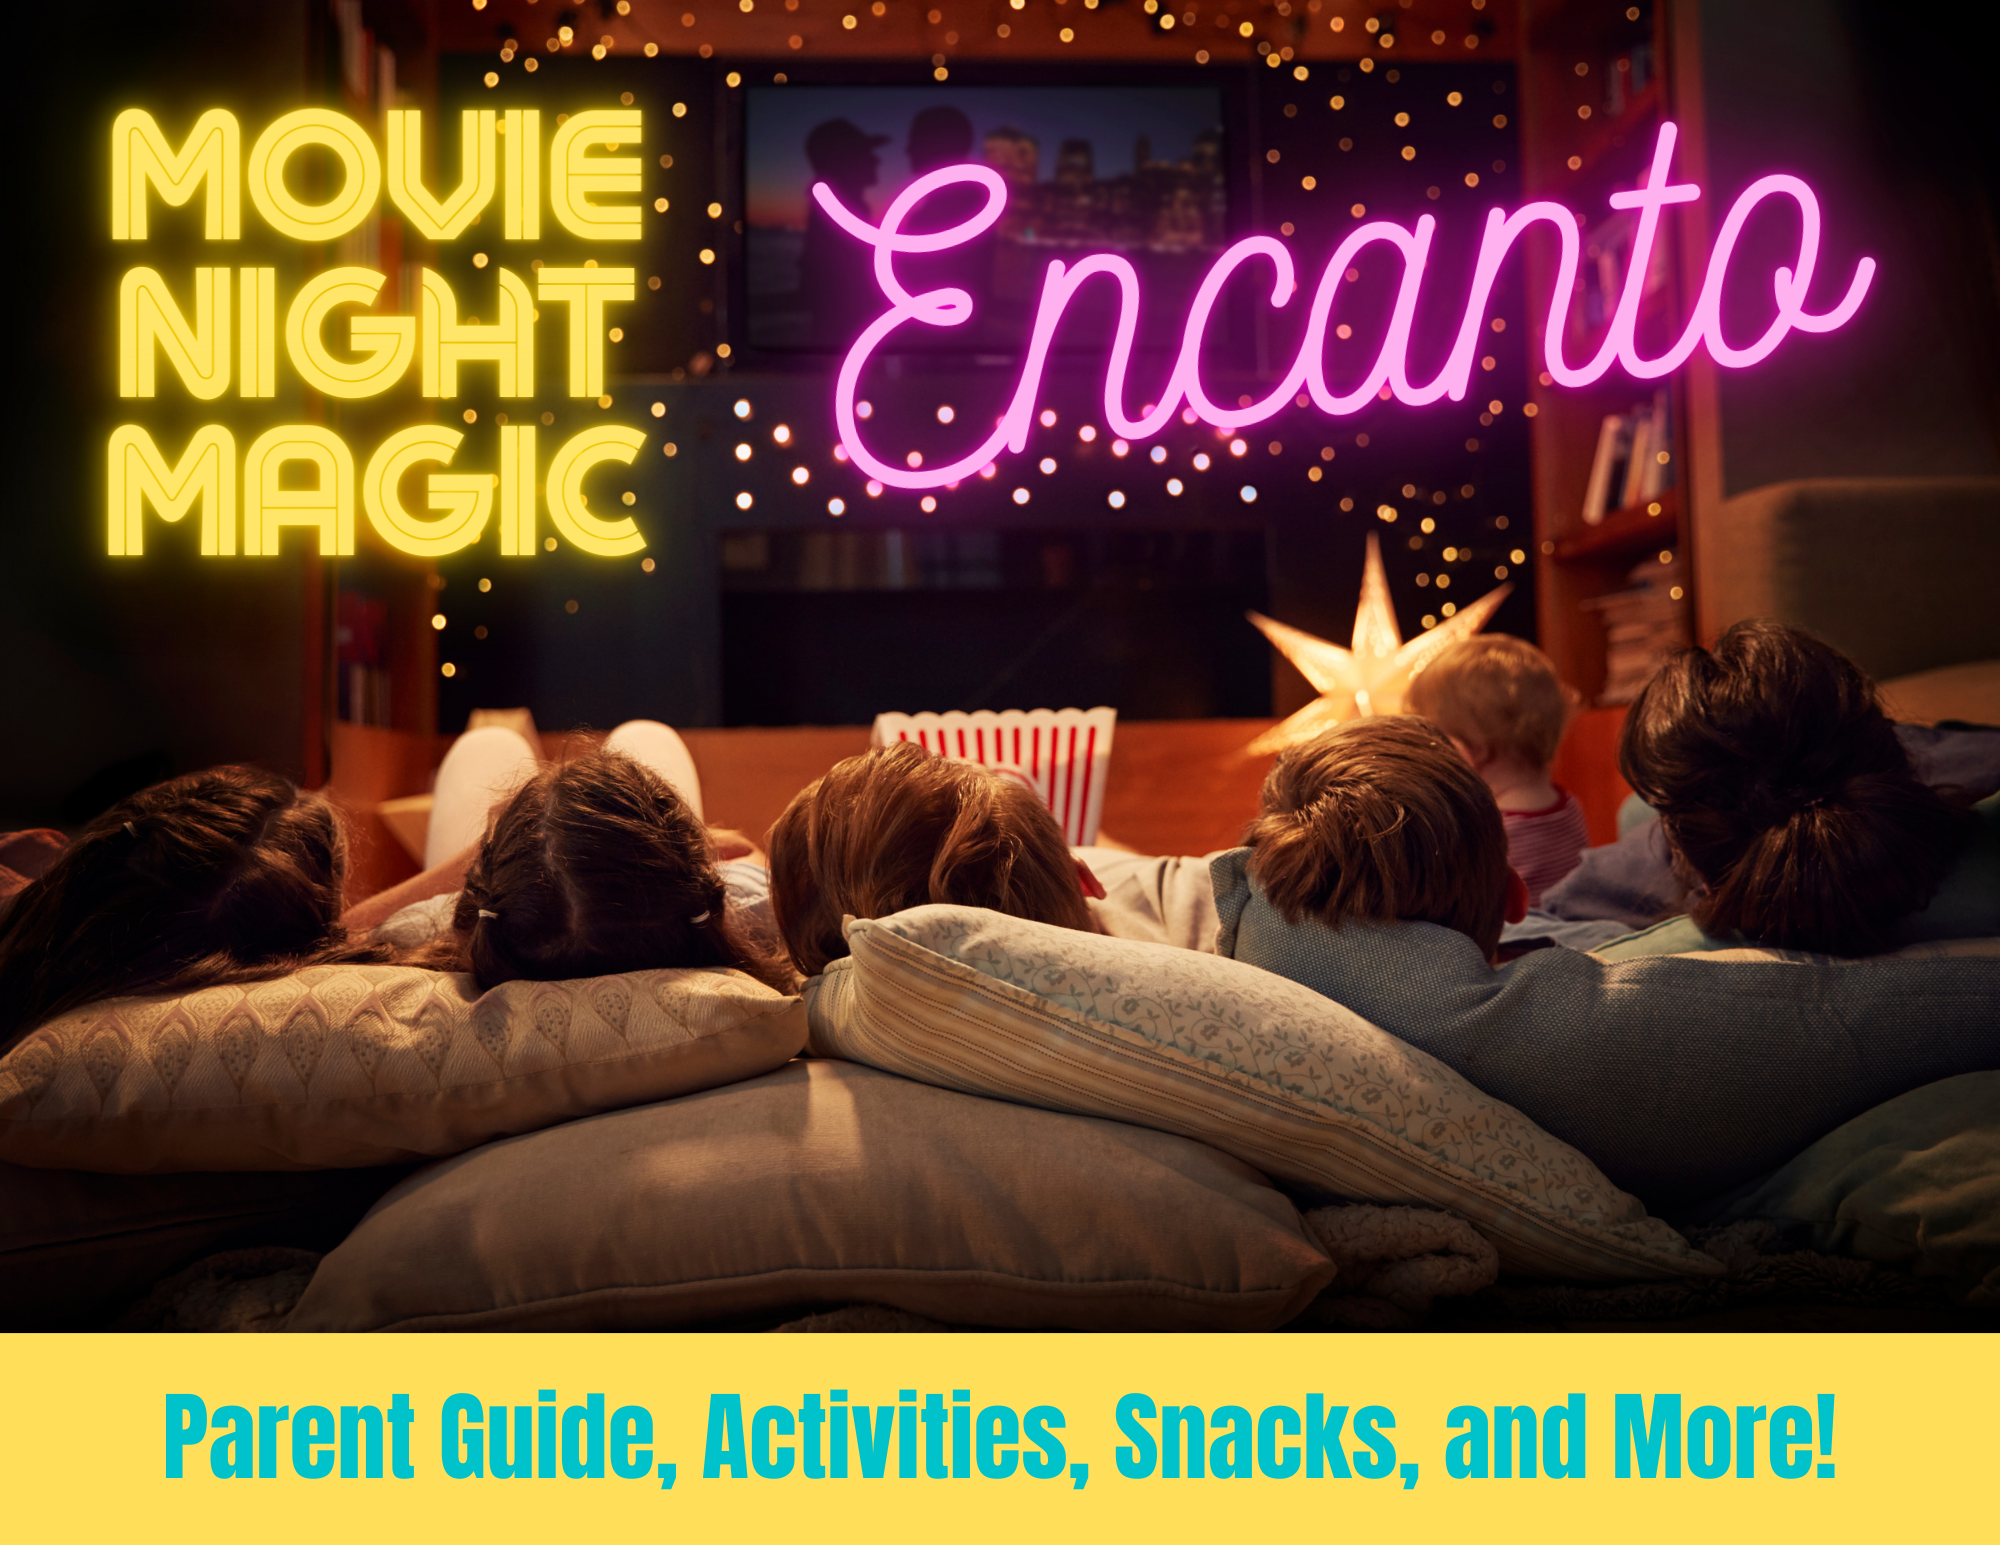 Movie Night Magic with Disney’s Encanto: Snacks, Activities, and More!